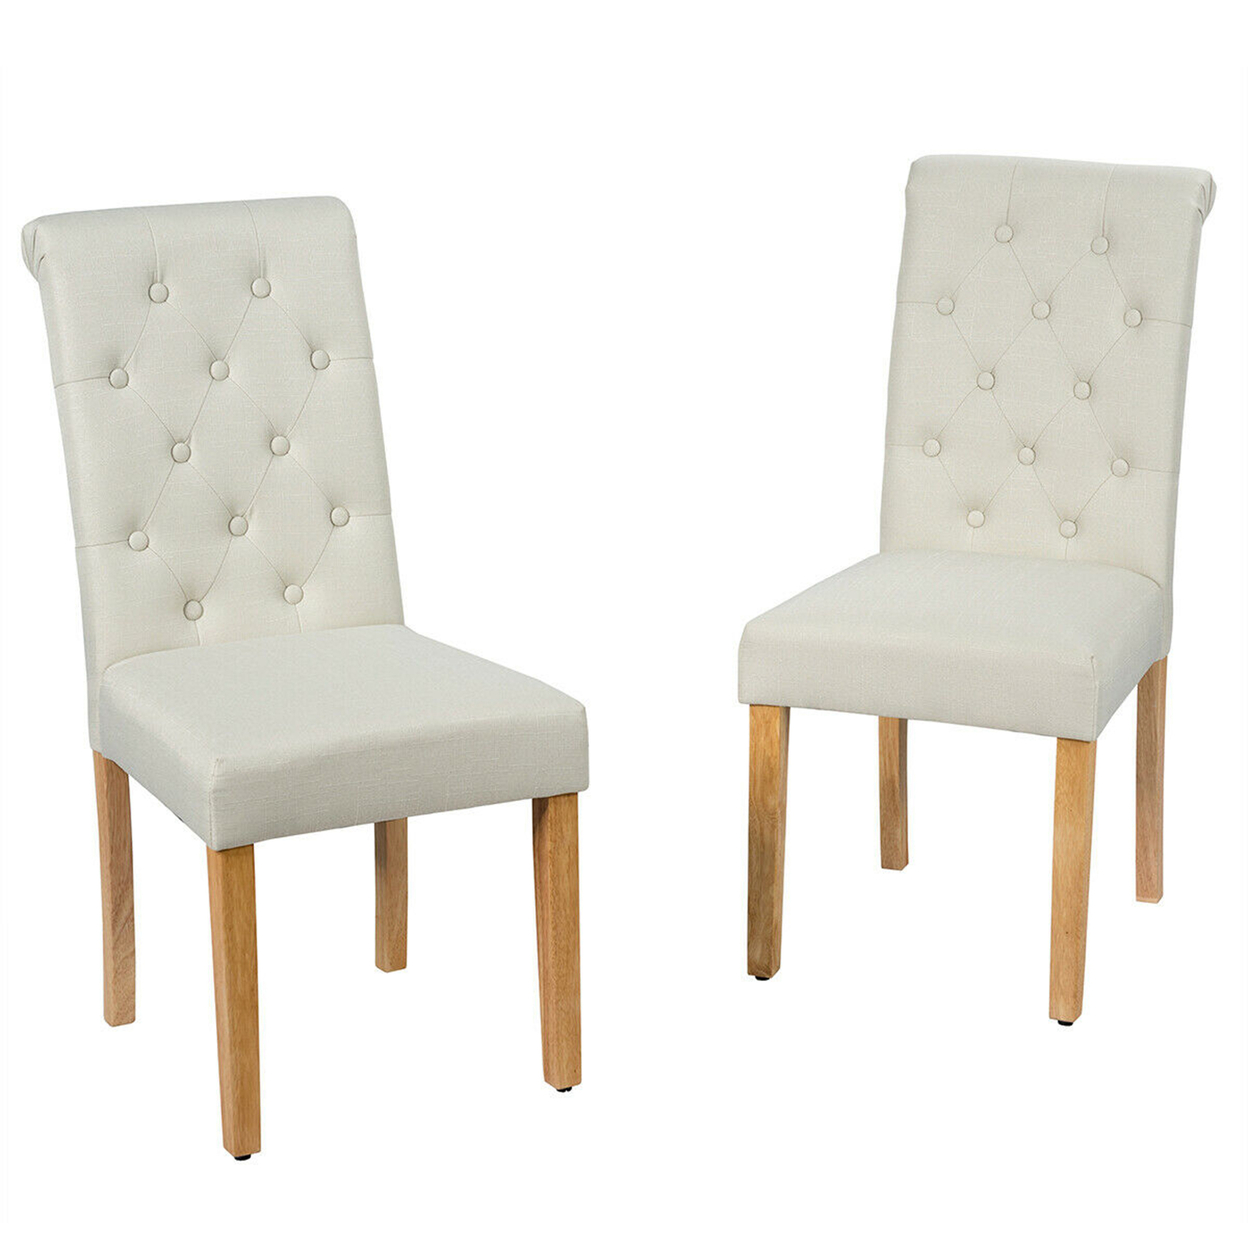 2PCS Upholstered Dining Chair High Back Armless Chair W/ Wooden Legs - Beige